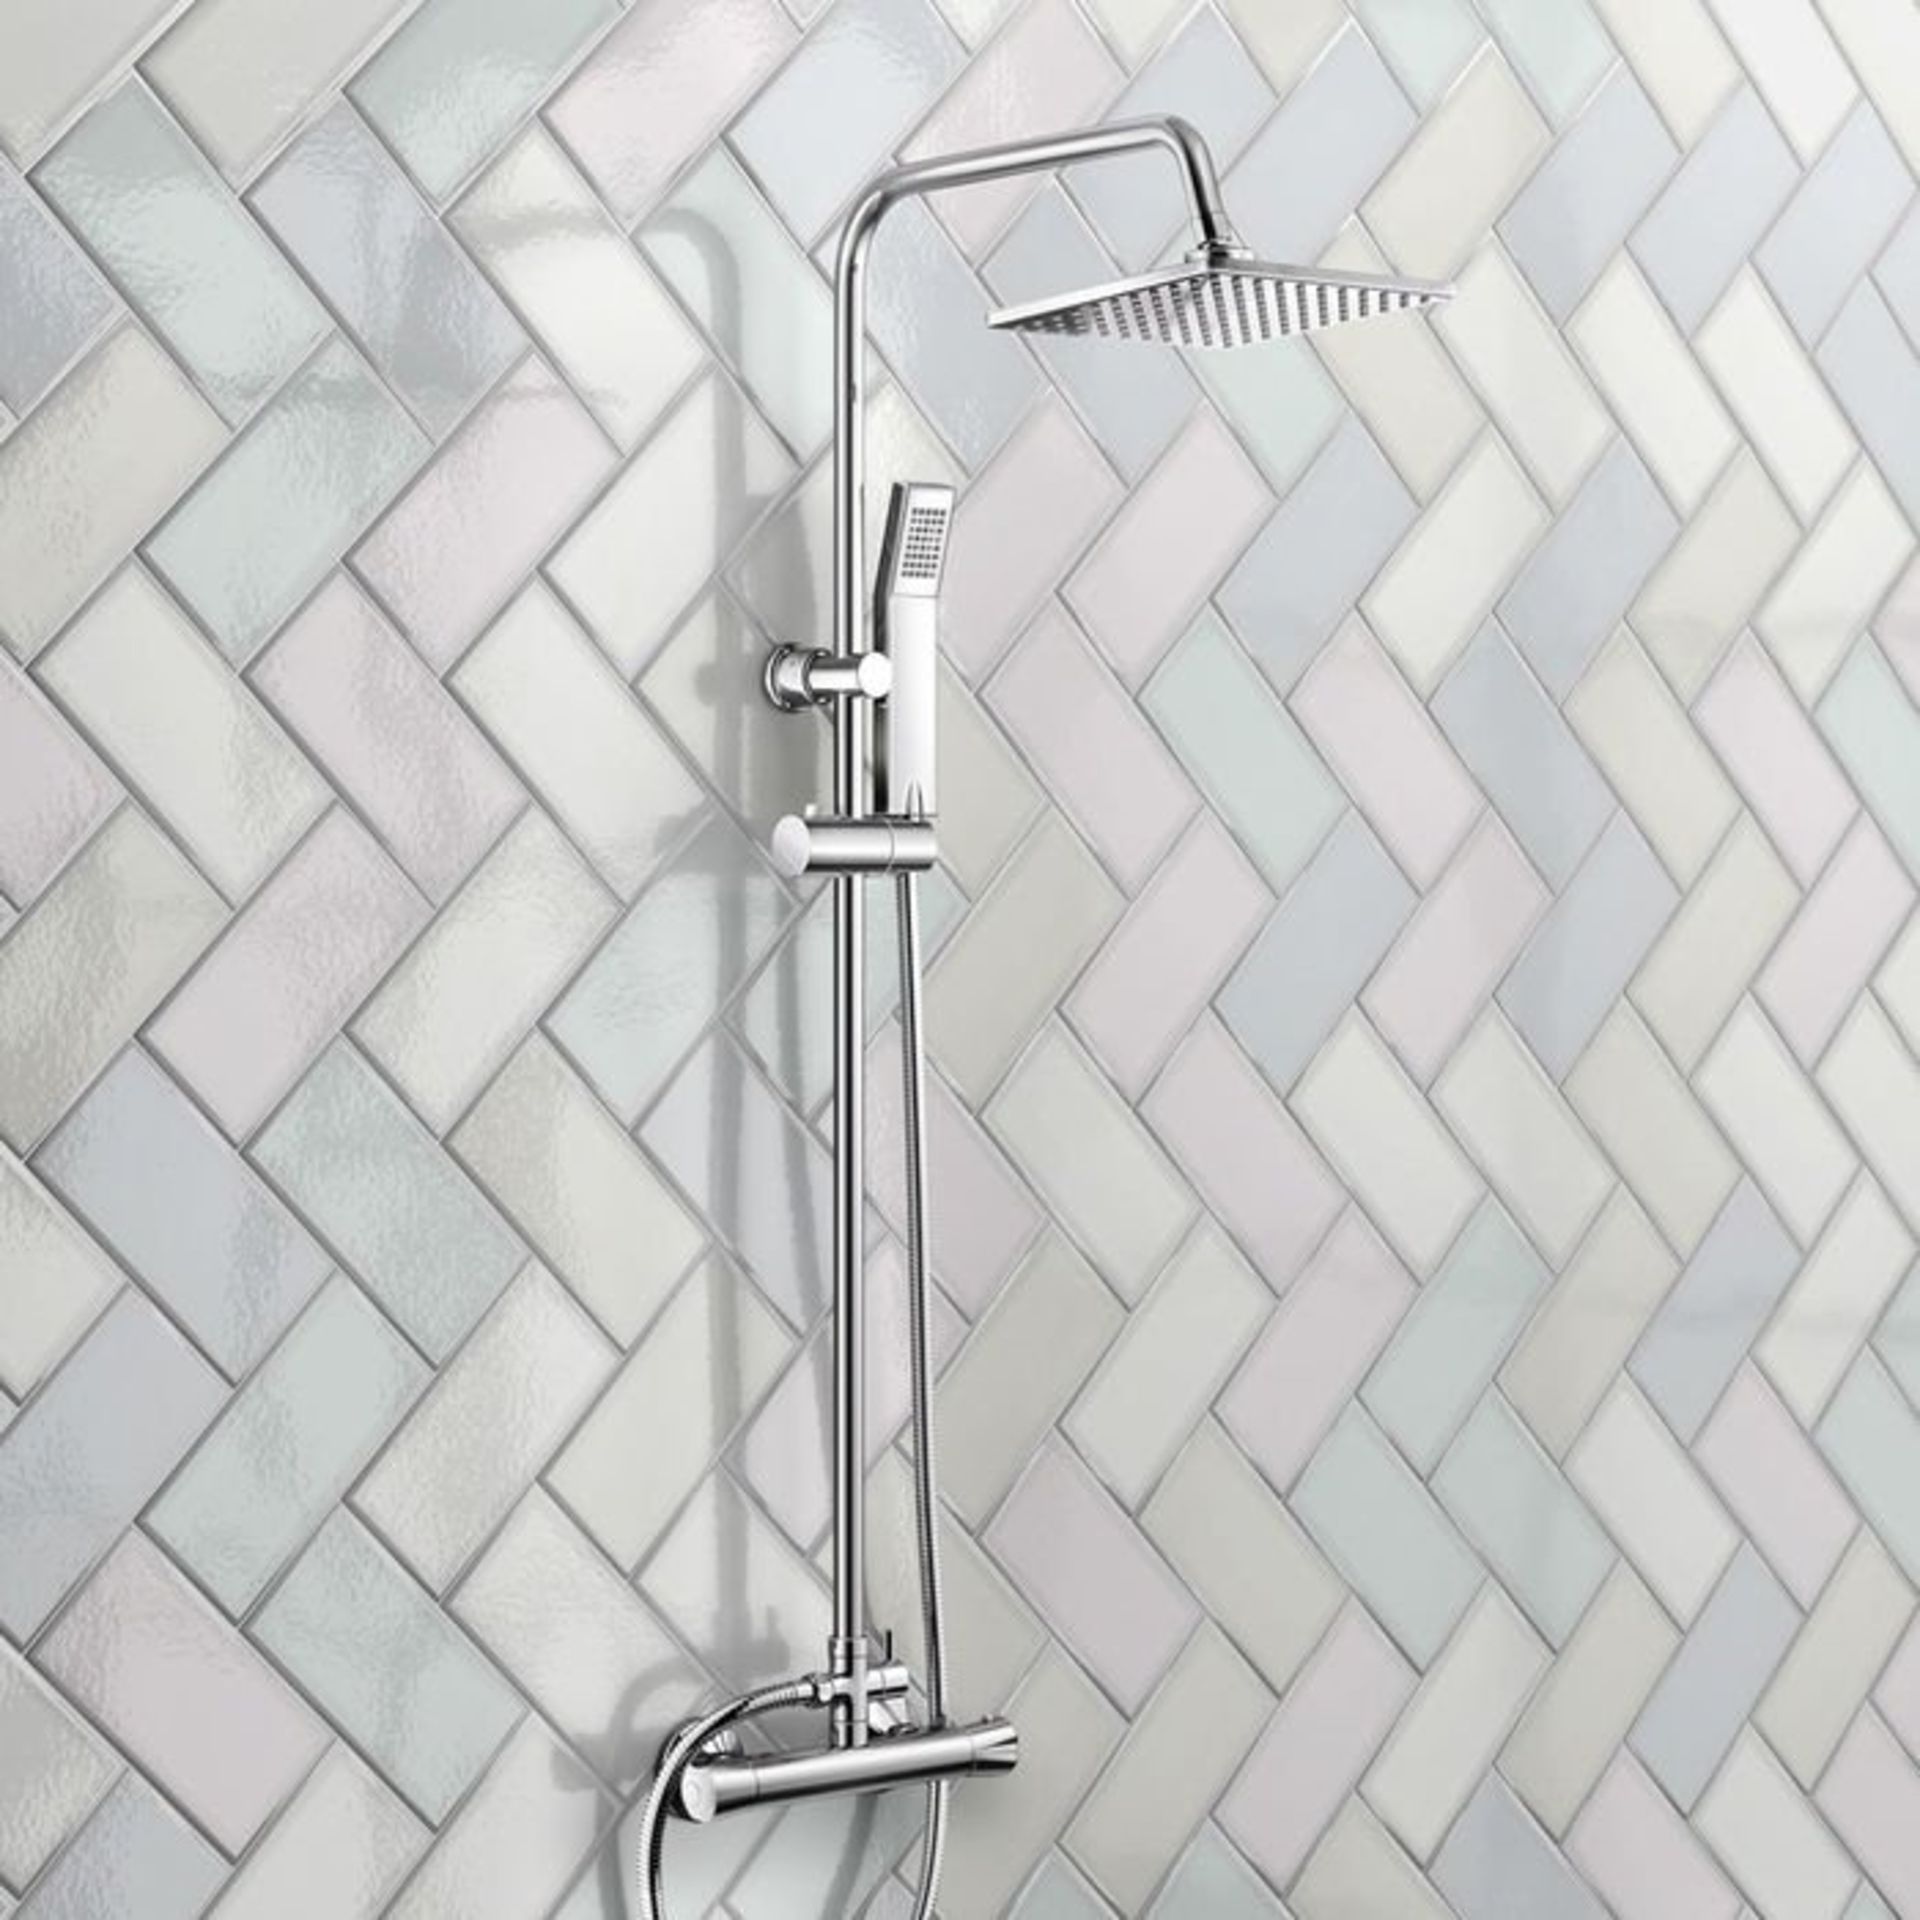 (J156) 200mm Square Head Thermostatic Exposed Shower Kit & Hand Held. We love this because it - Image 3 of 3